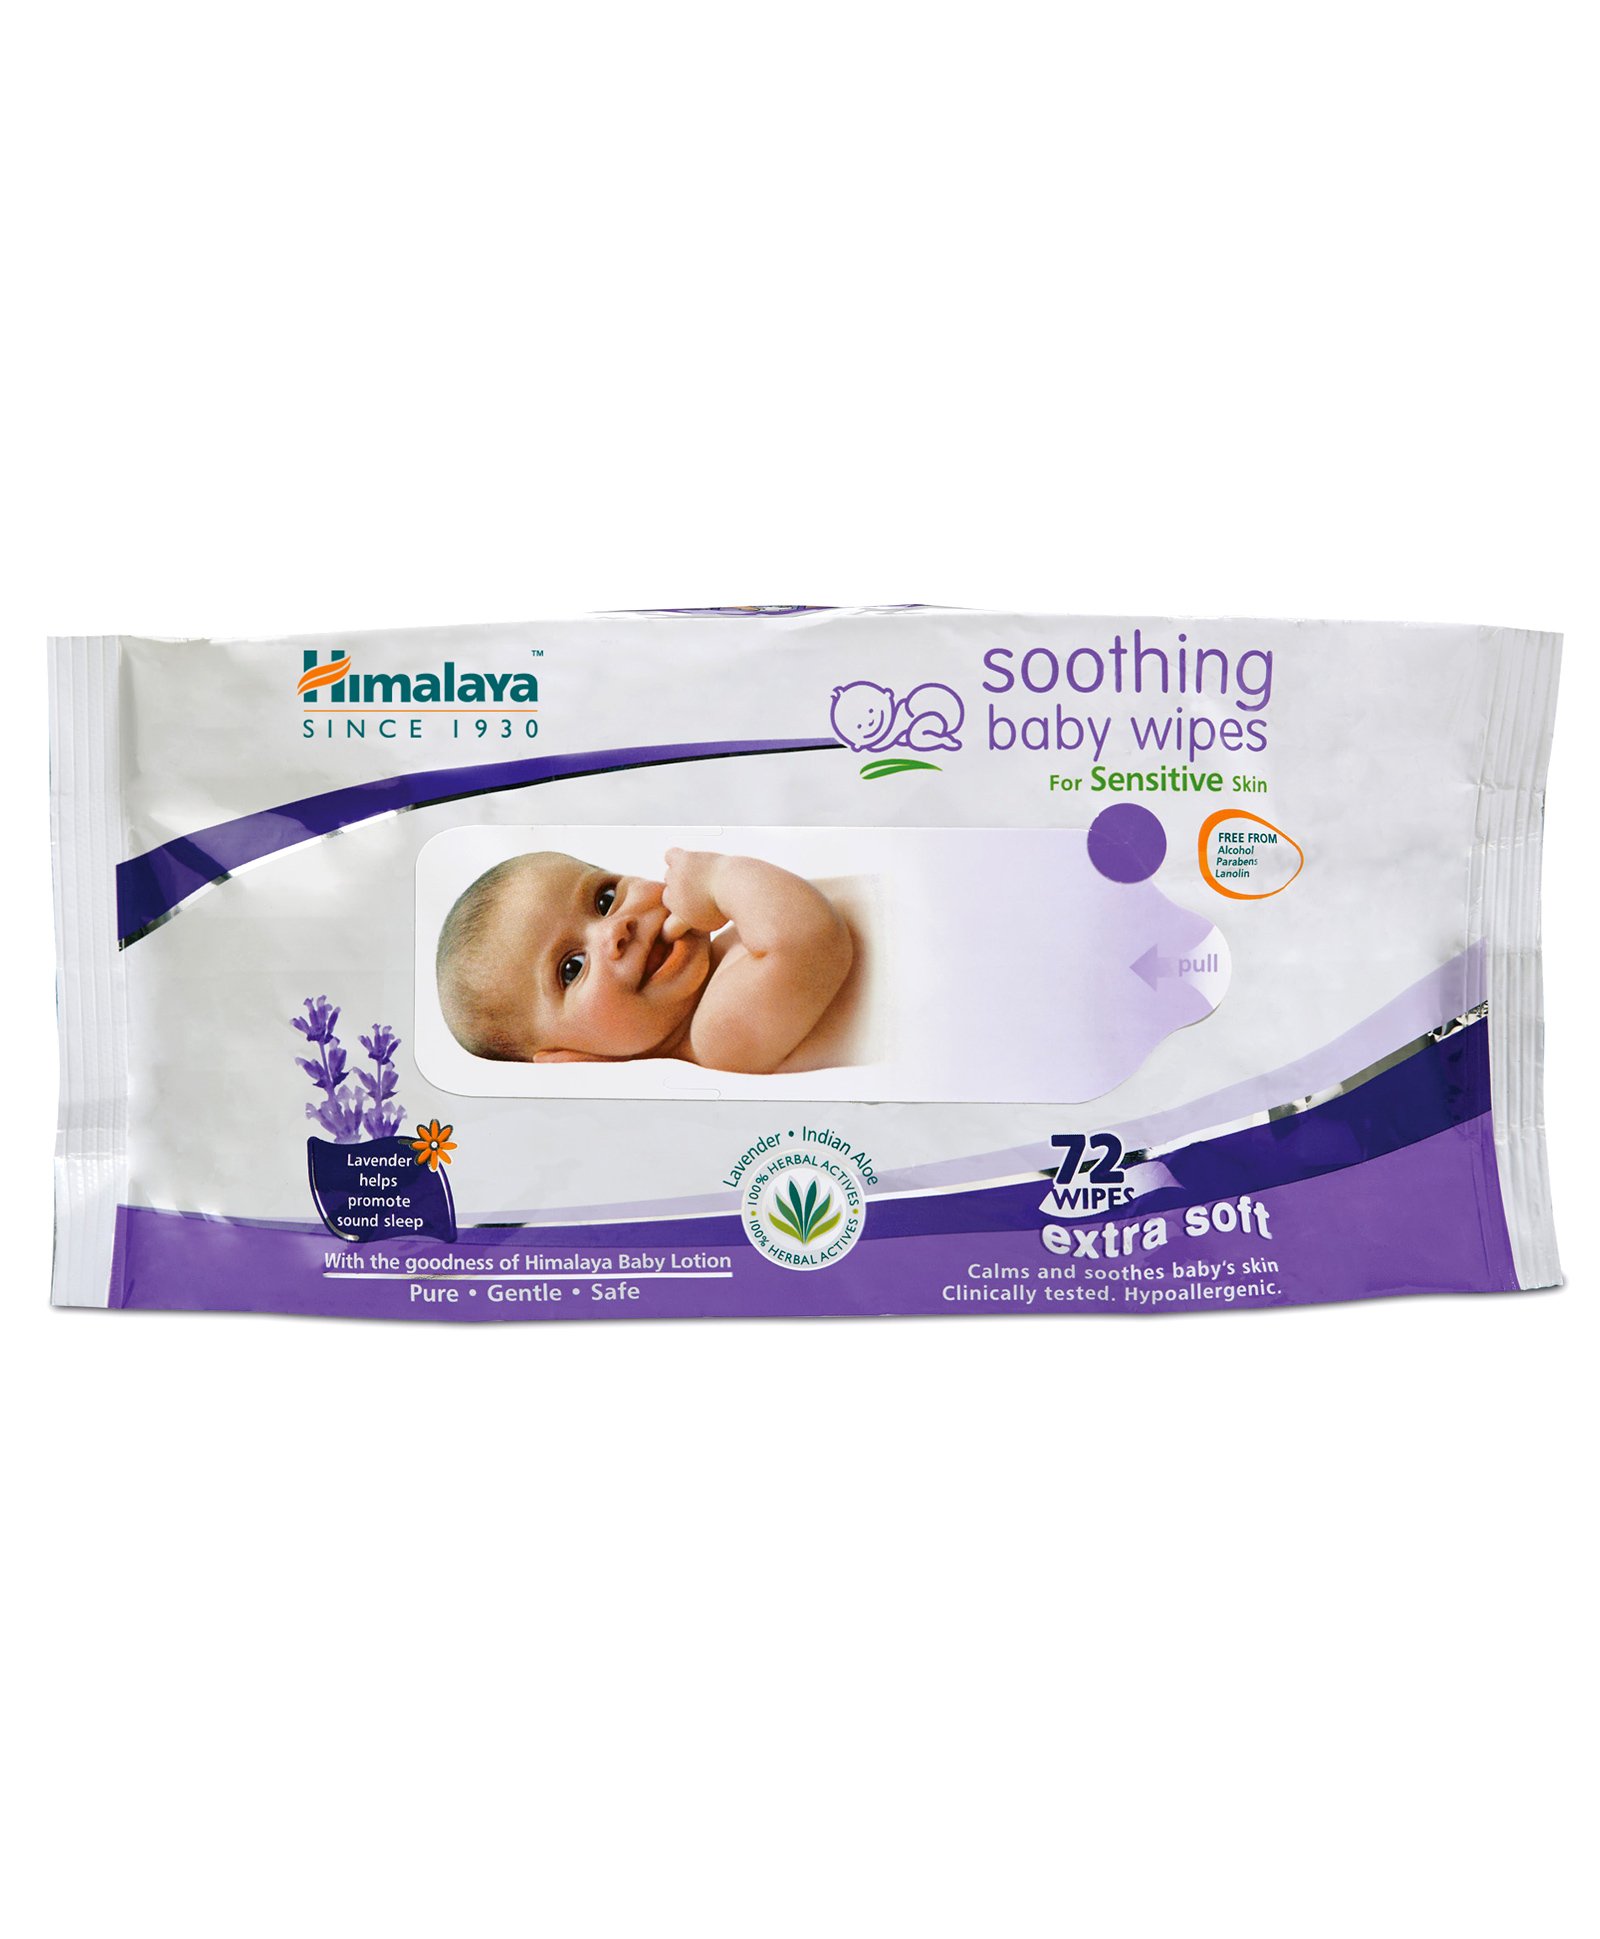 firstcry himalaya baby diapers